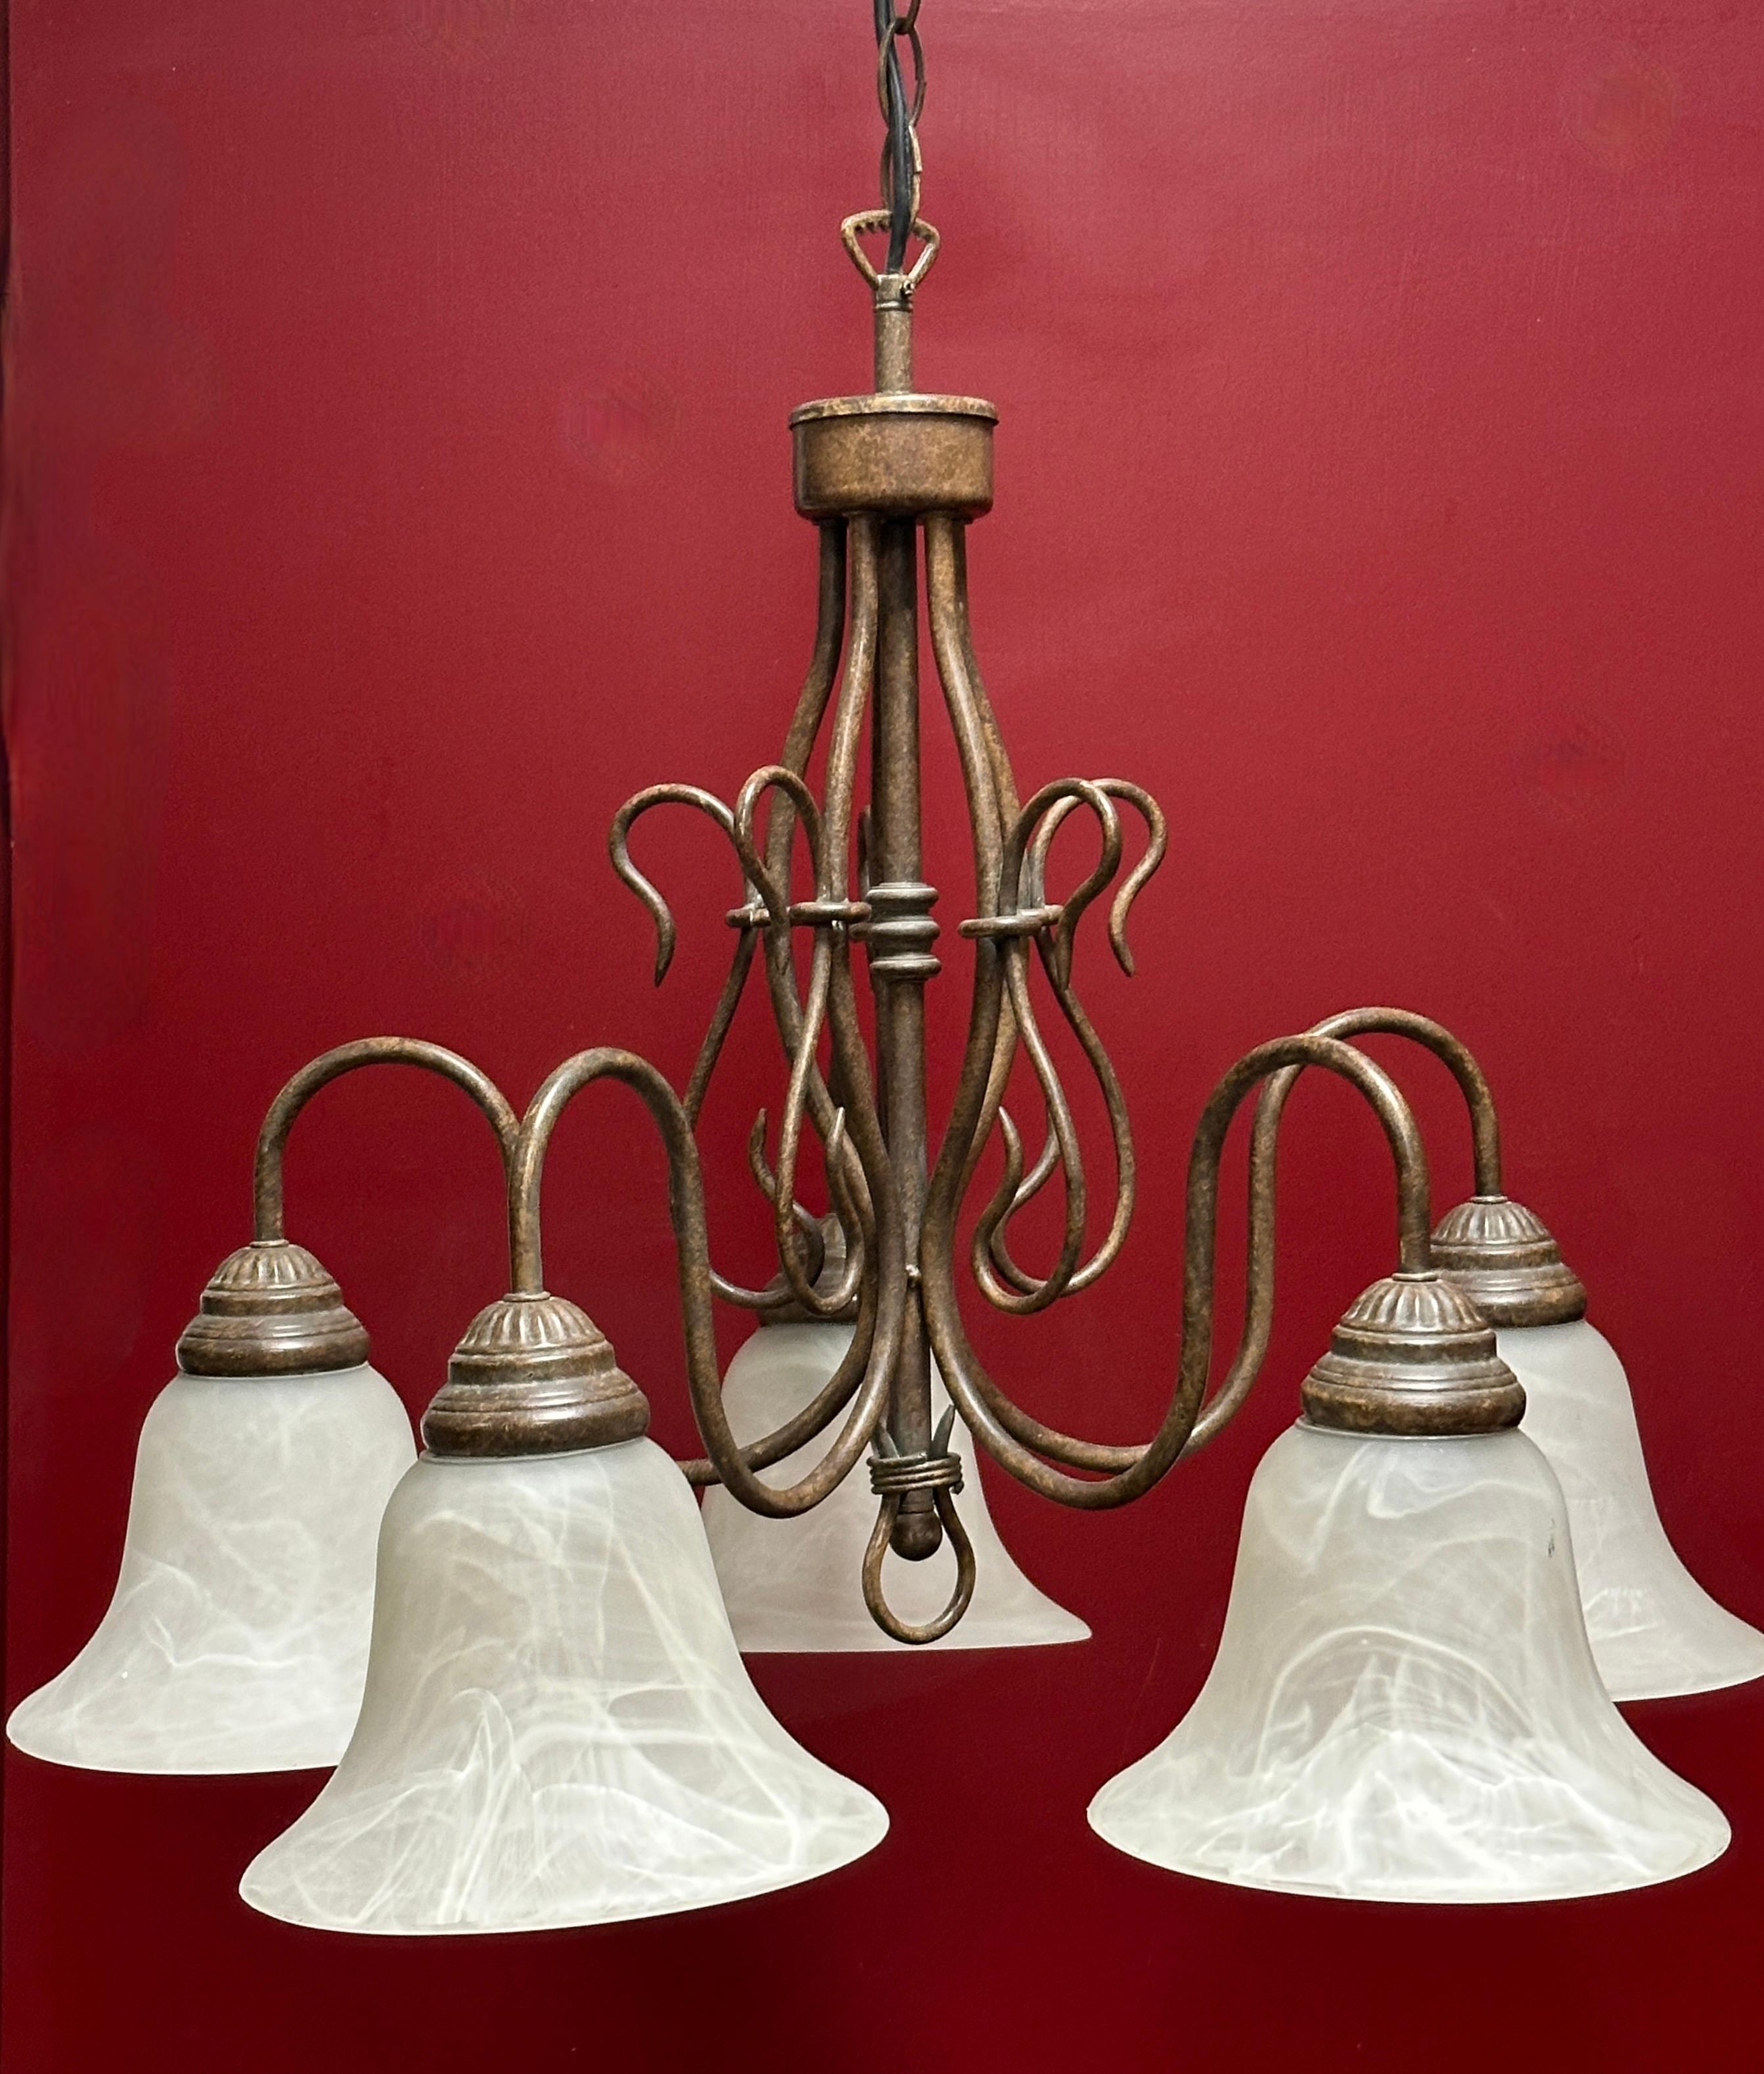 Gorgeous Metal and Glas Shade Five Light Chandelier, Farm House Style 1980s For Sale 2